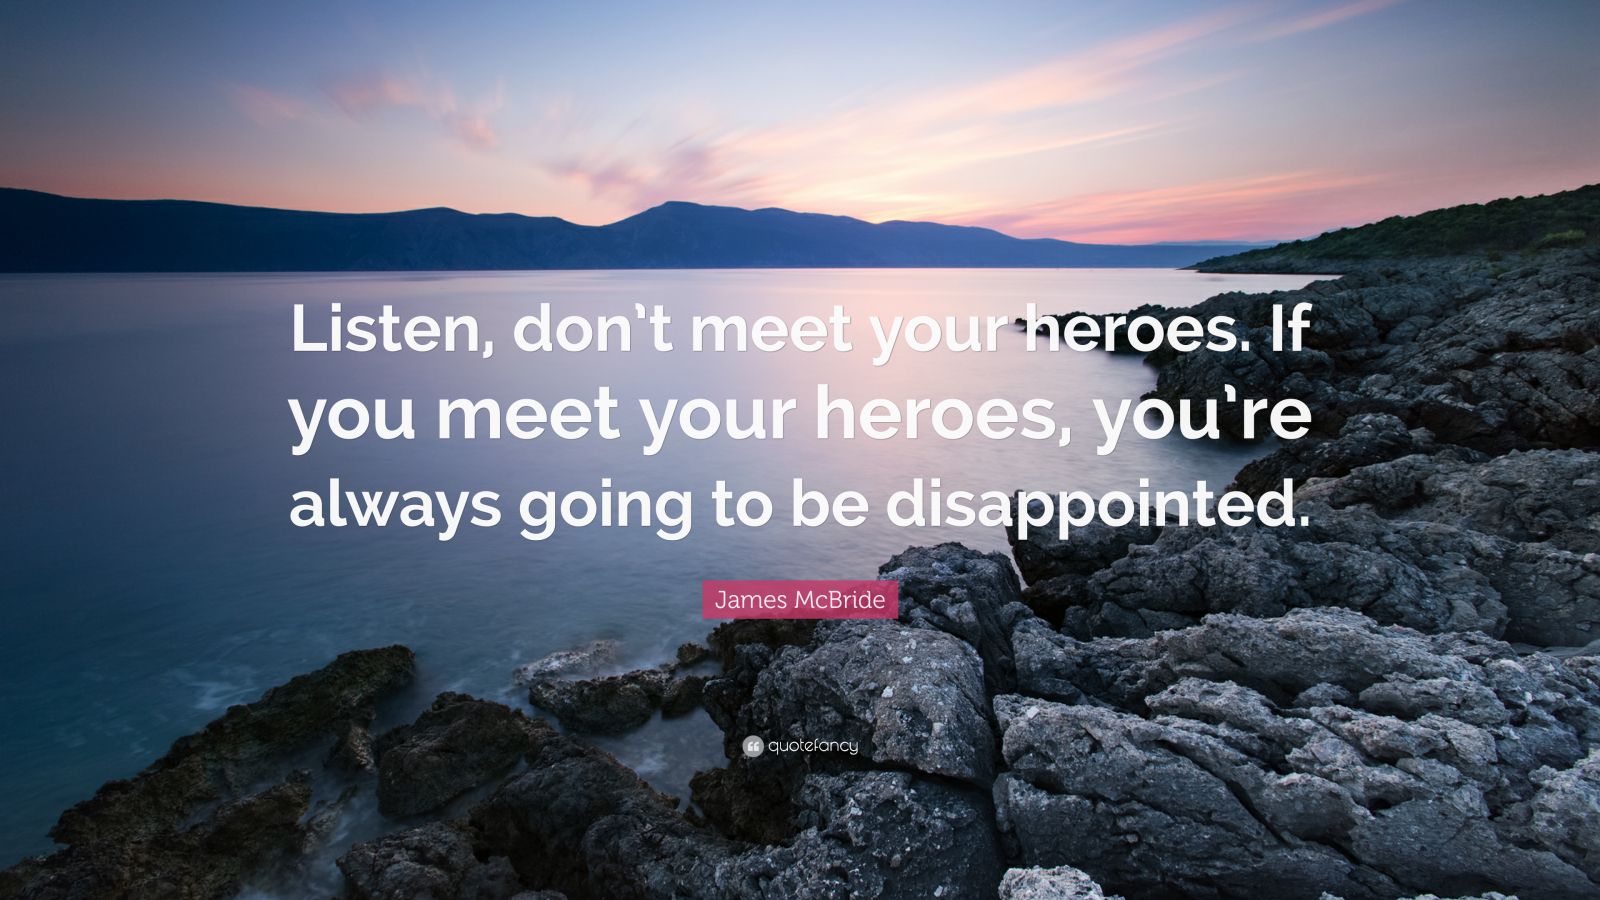 Dont meet your heroes